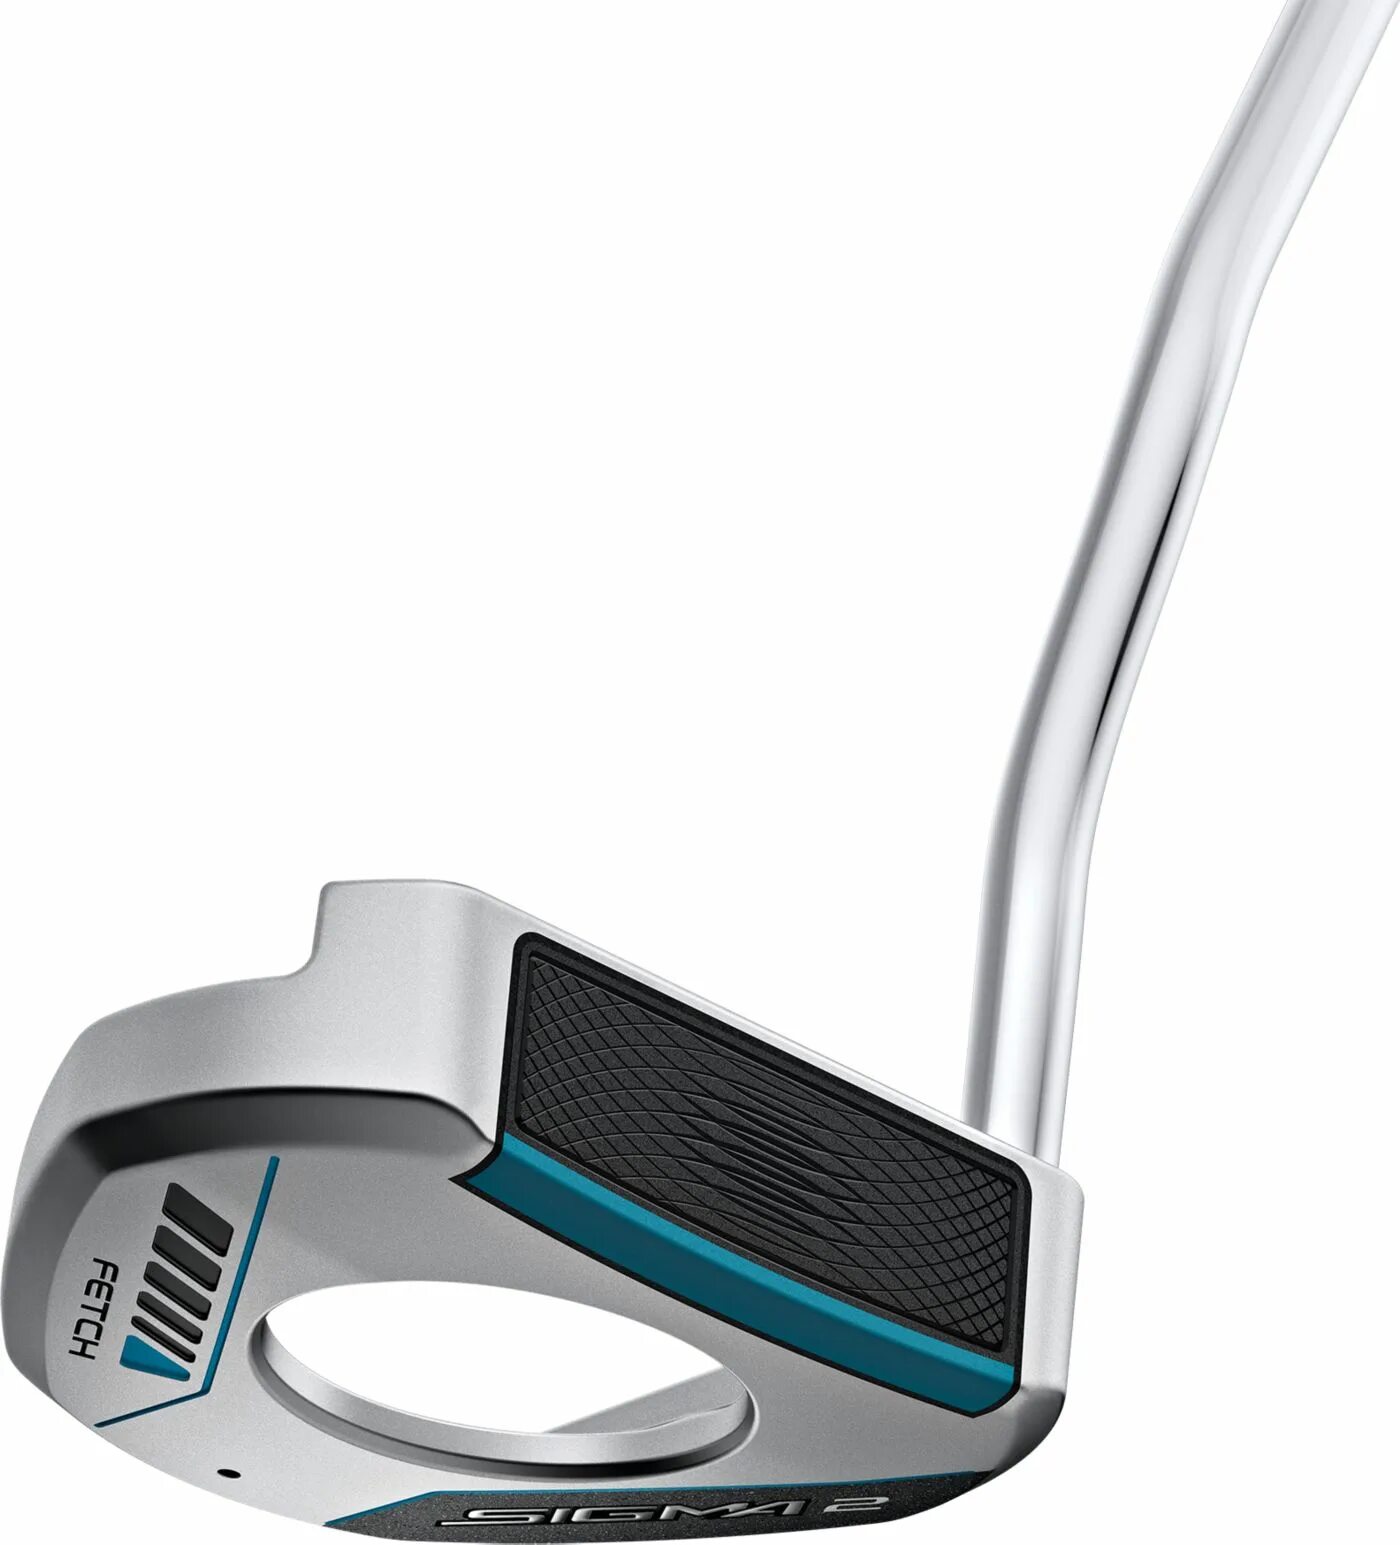 Ping two. Паттер PGM g300. Паттер (Putter. Golf Putter. Sigma Pro k2.